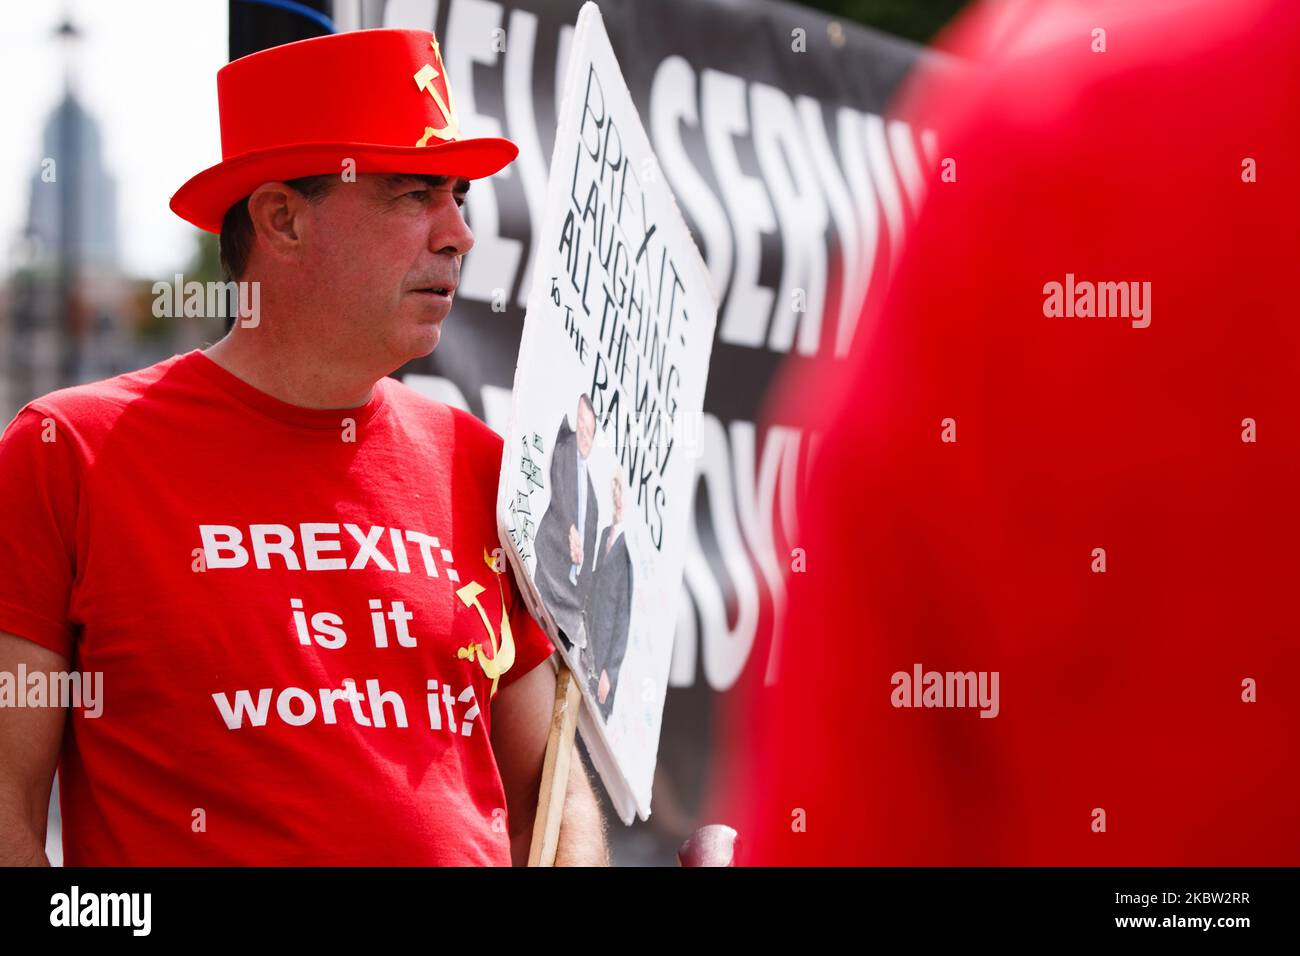 Anti-Brexit activist Steve Bray, wearing a hat and t-shirt featuring a hammer and sickle, demonstrates outside the Houses of Parliament in London, England, on July 22, 2020. Yesterday saw the publication of the long-awaited Intelligence and Security Committee (ISC) report on Russian activity in the UK, which includes among its assertions the claim that the British government 'actively avoided' investigating possible Russian interference in the 2016 referendum on EU membership. (Photo by David Cliff/NurPhoto) Stock Photo